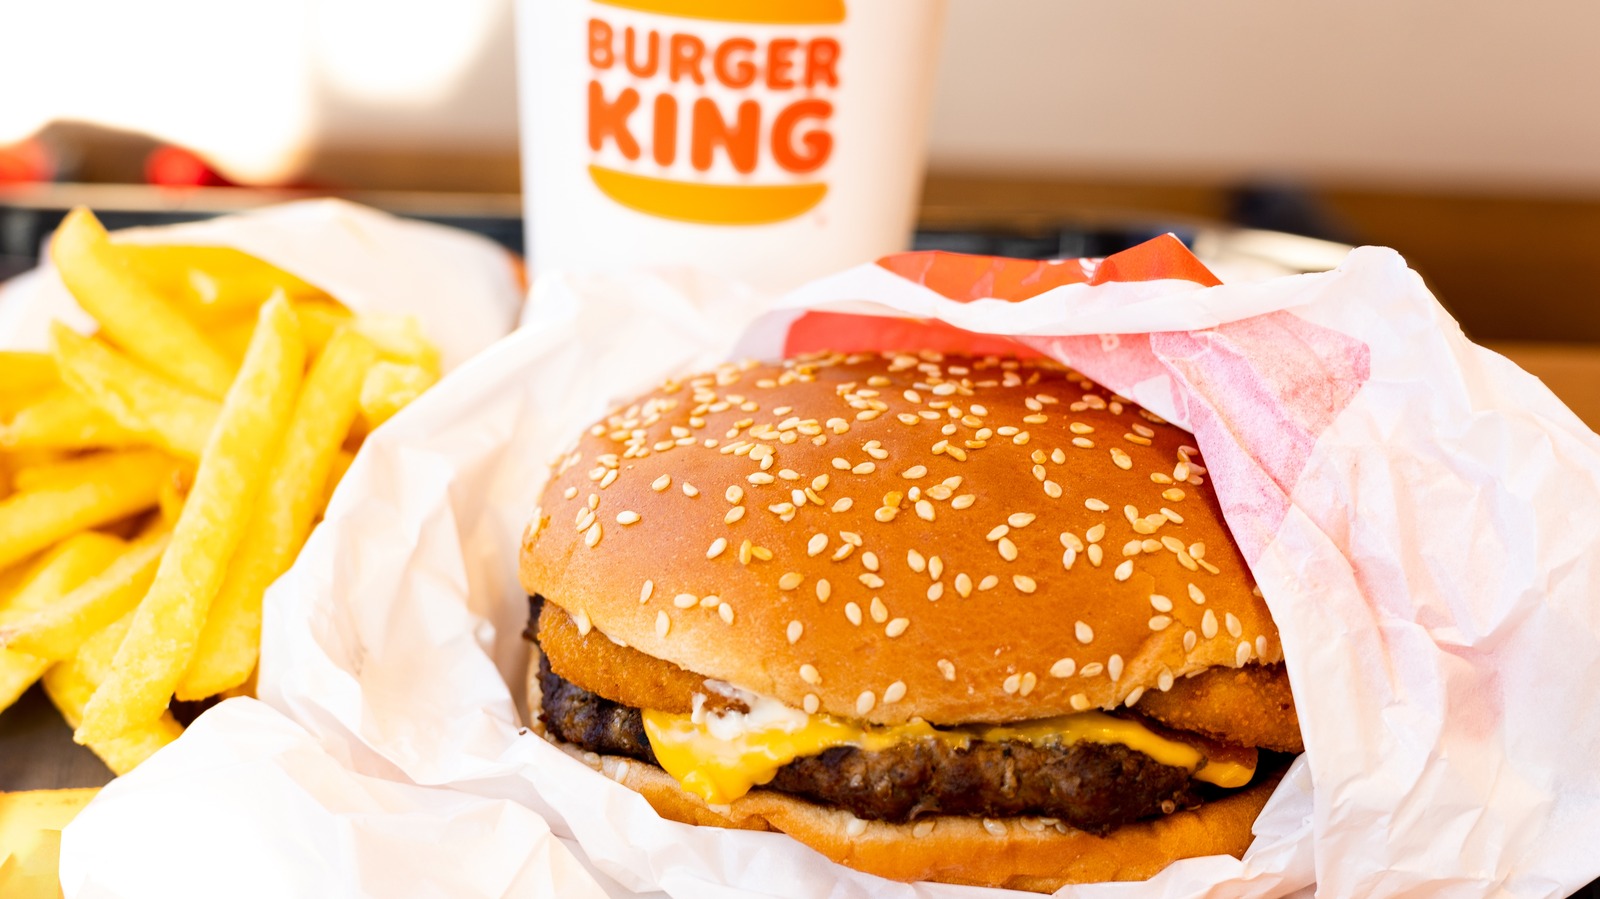 One Of Burger King's Largest Franchisees Is Seeking Bankruptcy Protection